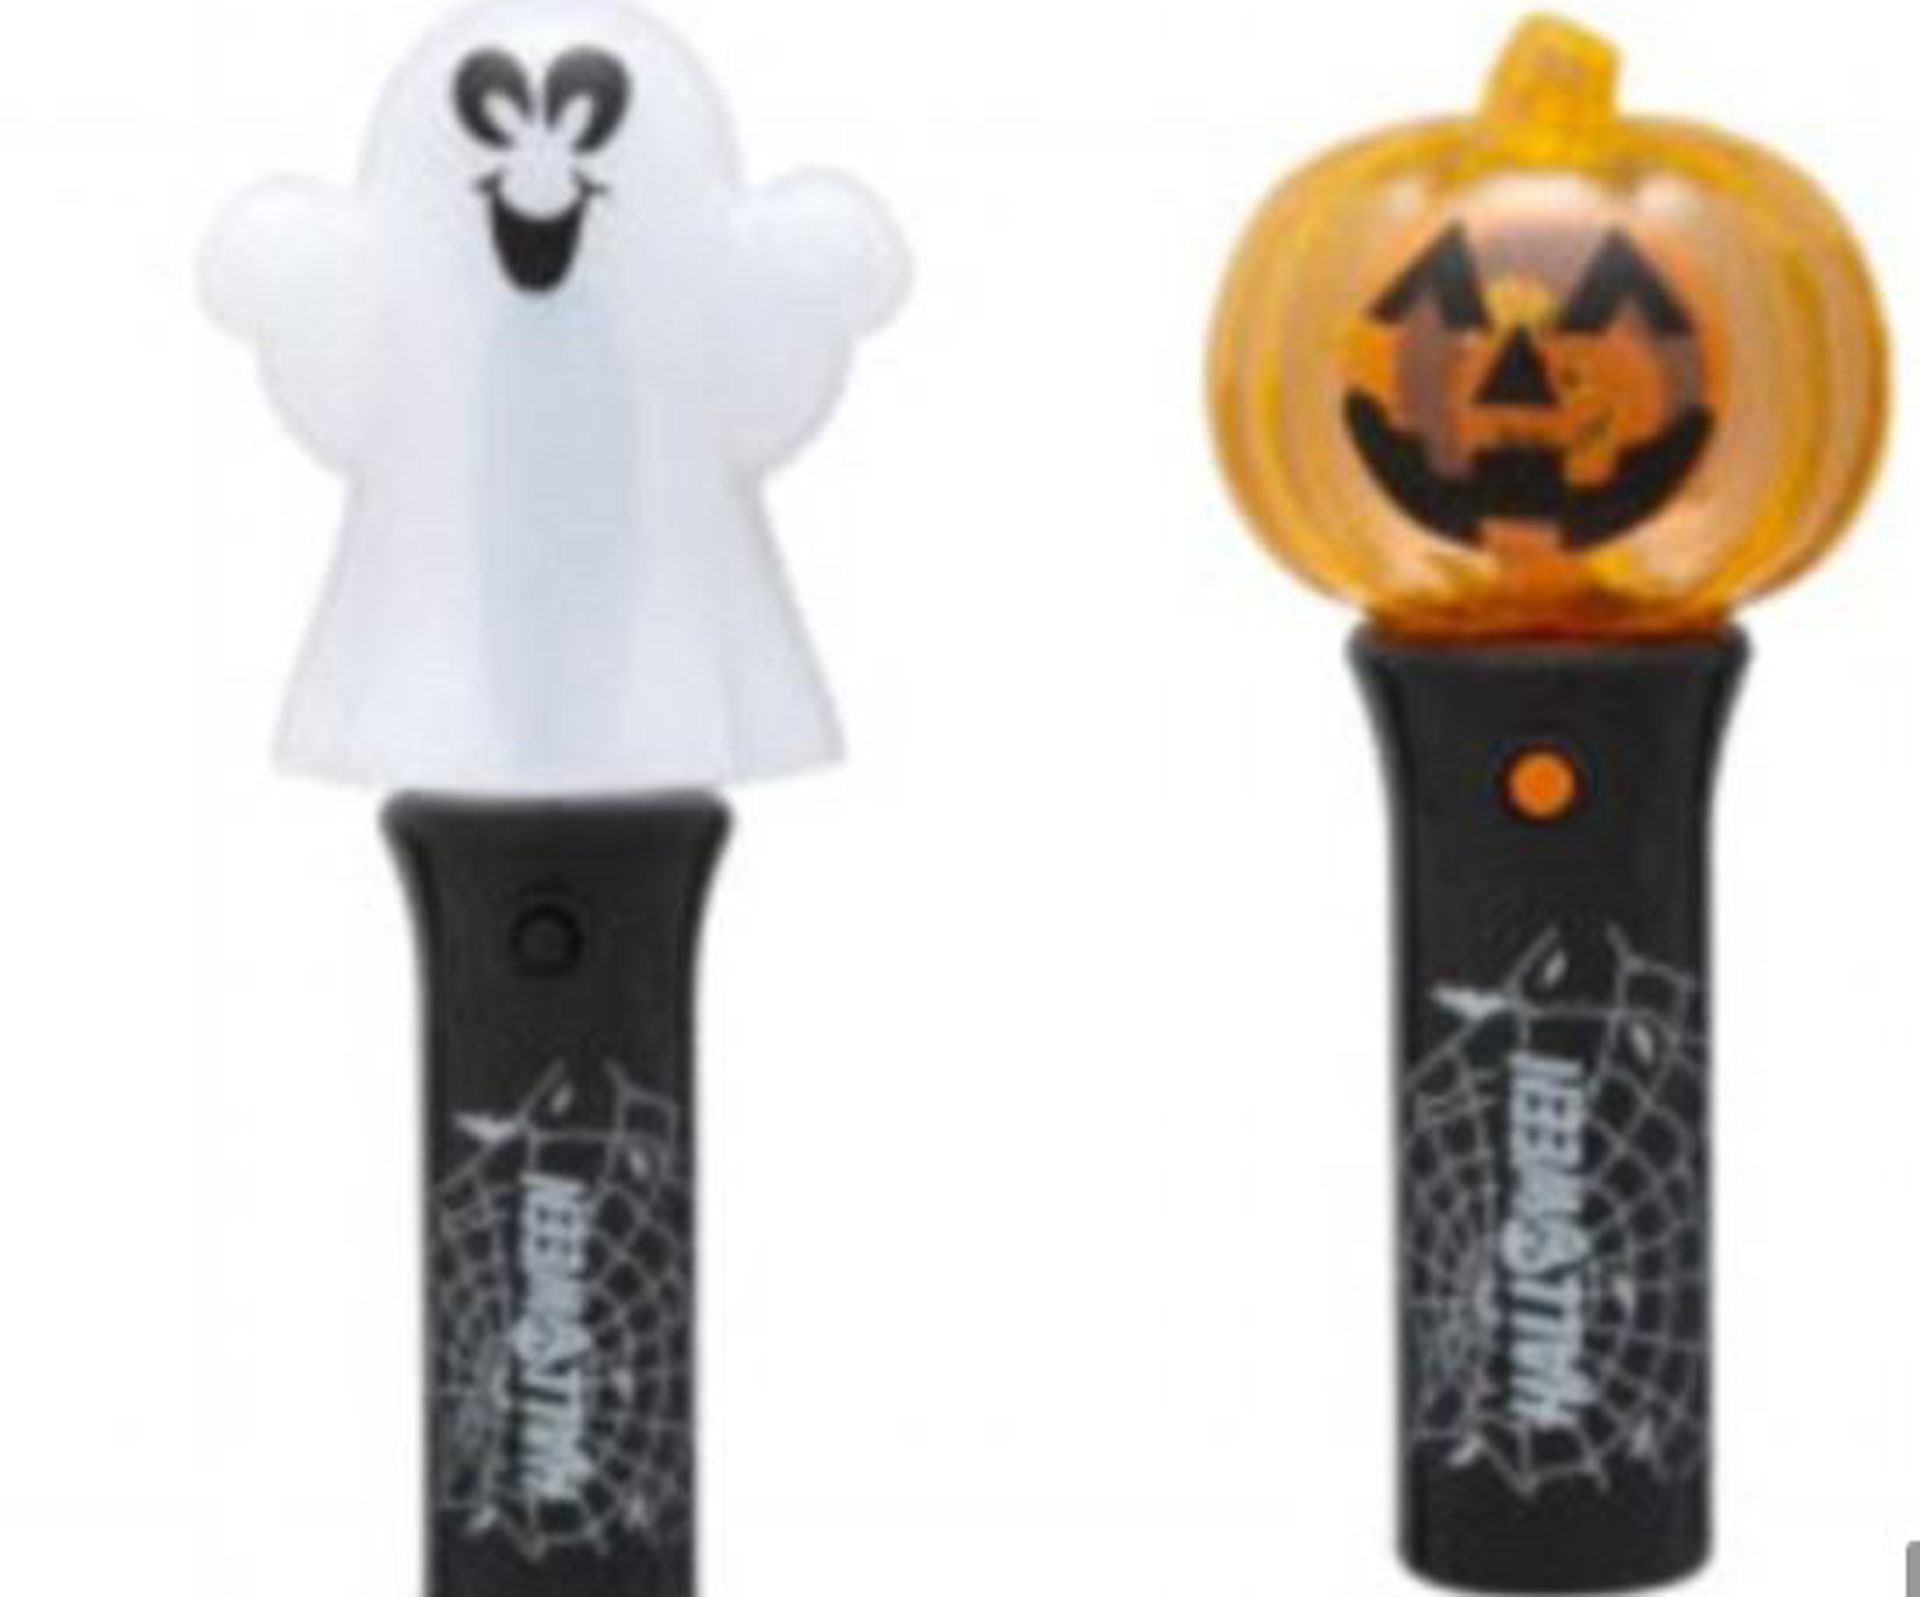 URGENT RECALL: Halloween toys from Woolworths potentially dangerous